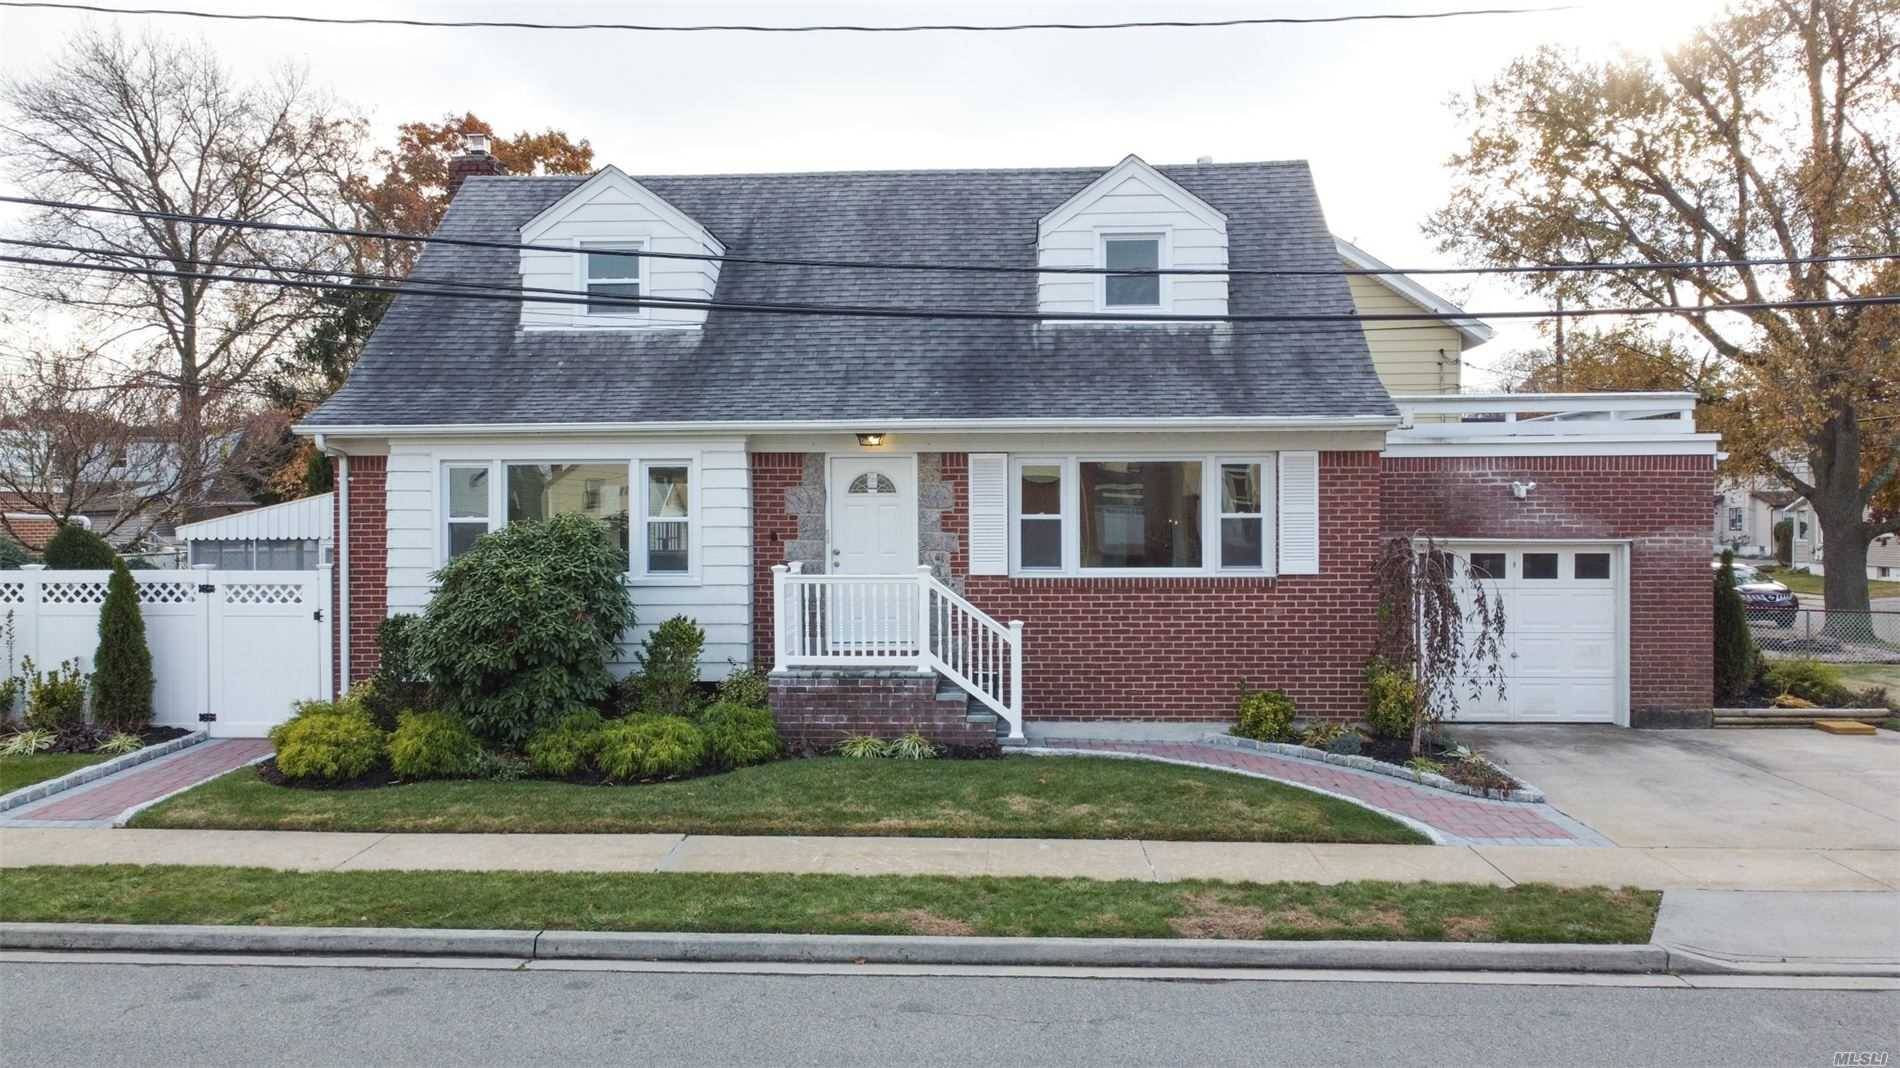 Completely Updated Wide Line Cape Walking Distance To The LIRR, Featuring New Kitchen With Quartz Counter Tops And Stainless Steel Appliances, Gleaming Hardwood Floors, Updated Bathrooms, New Roof, Stoop, Windows ...